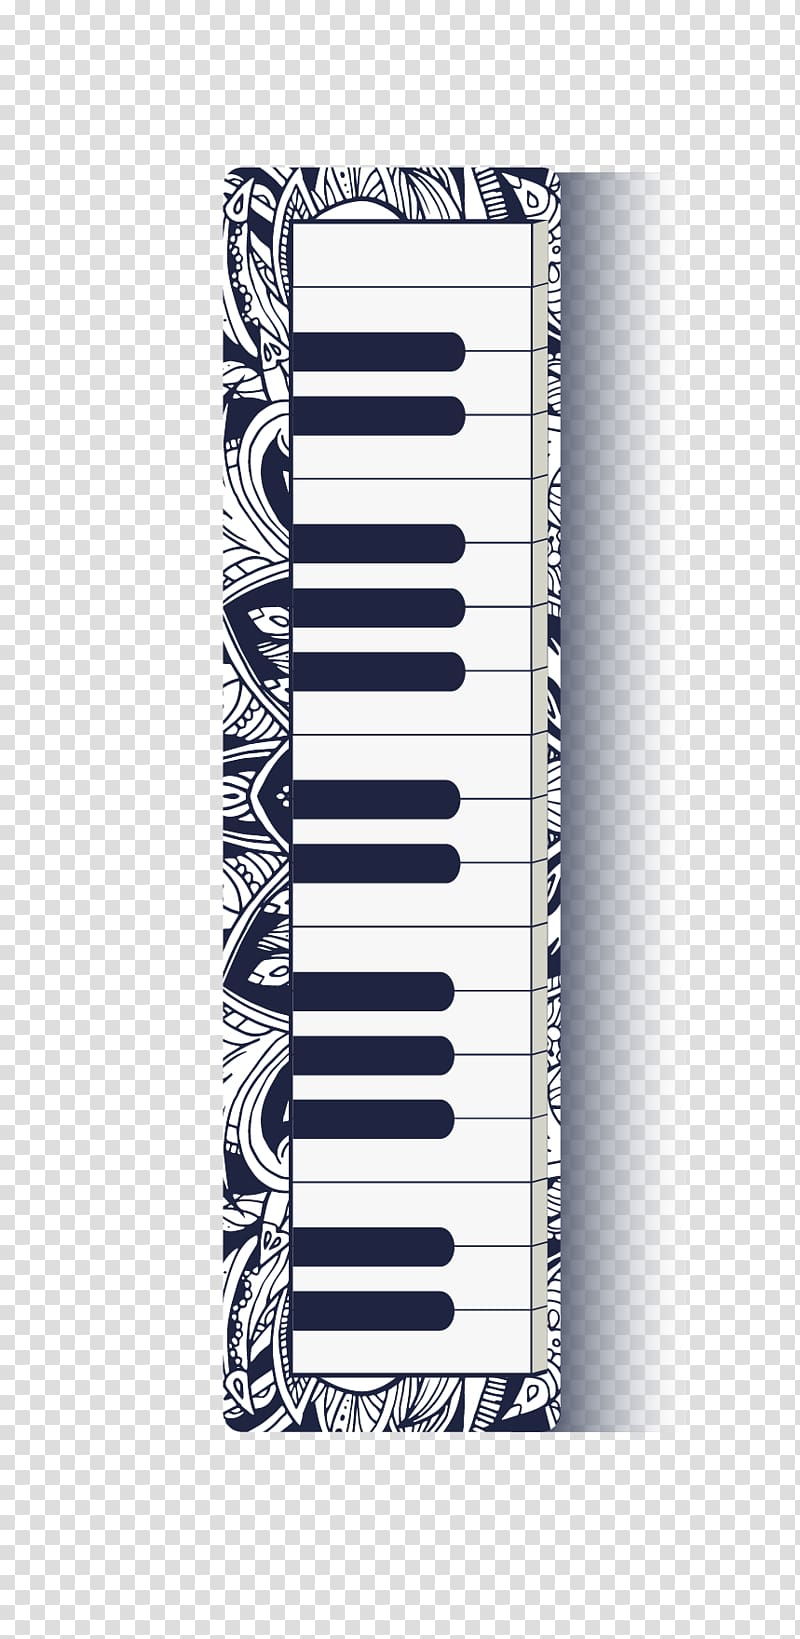 Musical Instruments Line Drawing Vector Images (over 6,000)